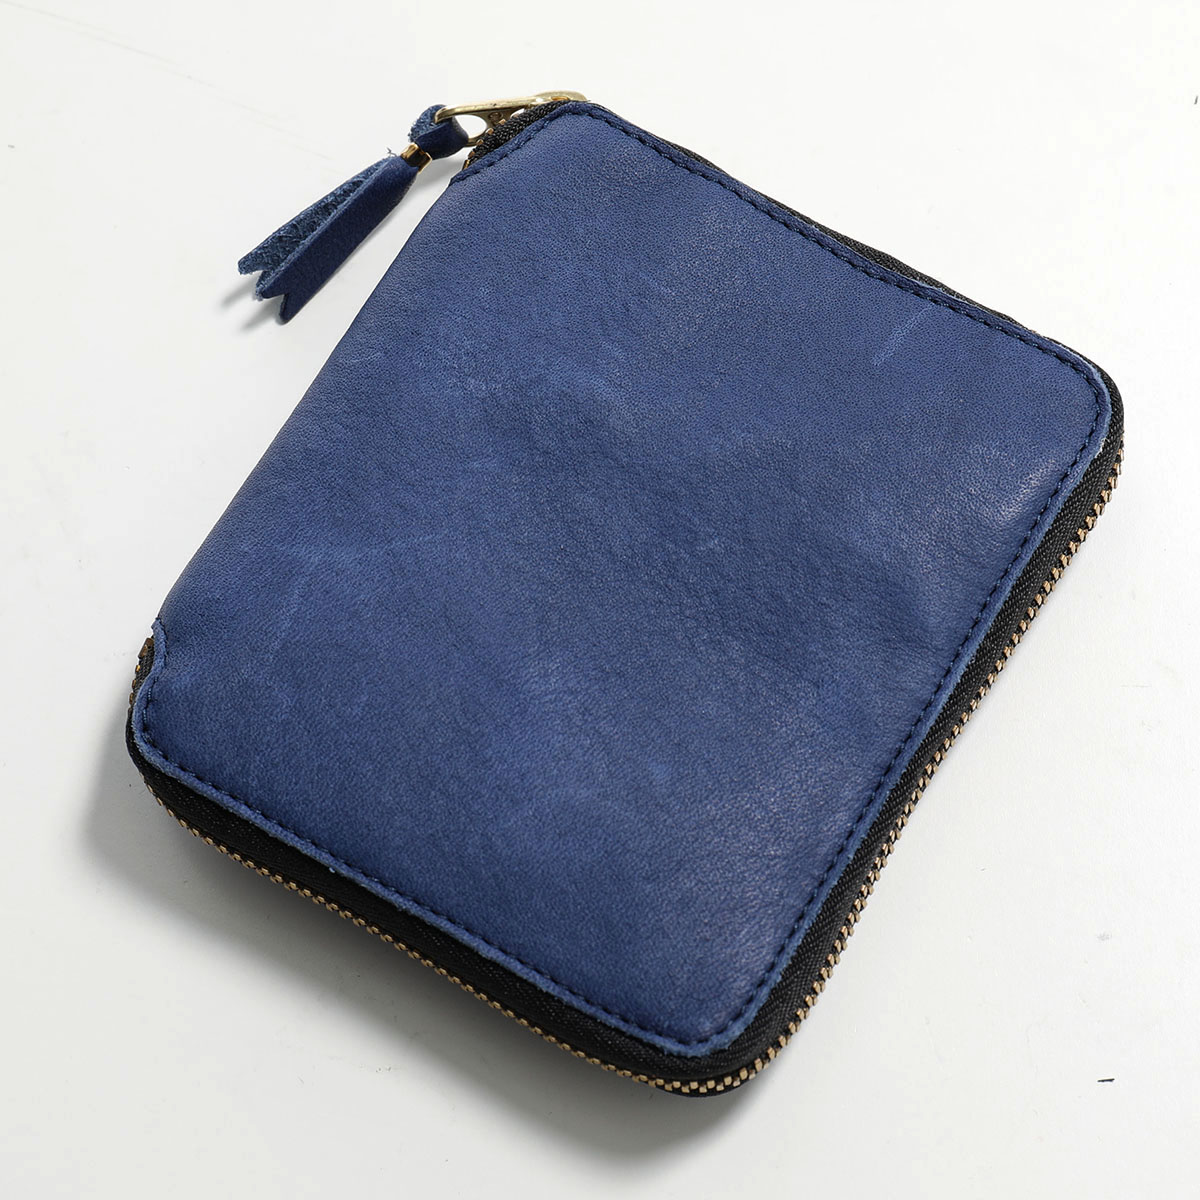 COMME des GARCONS コムデギャルソン 二つ折り財布 WASHED WALLET SA2100WW メンズ ラウンドファスナー 小銭入れあり レザー カラー4色｜s-musee｜05